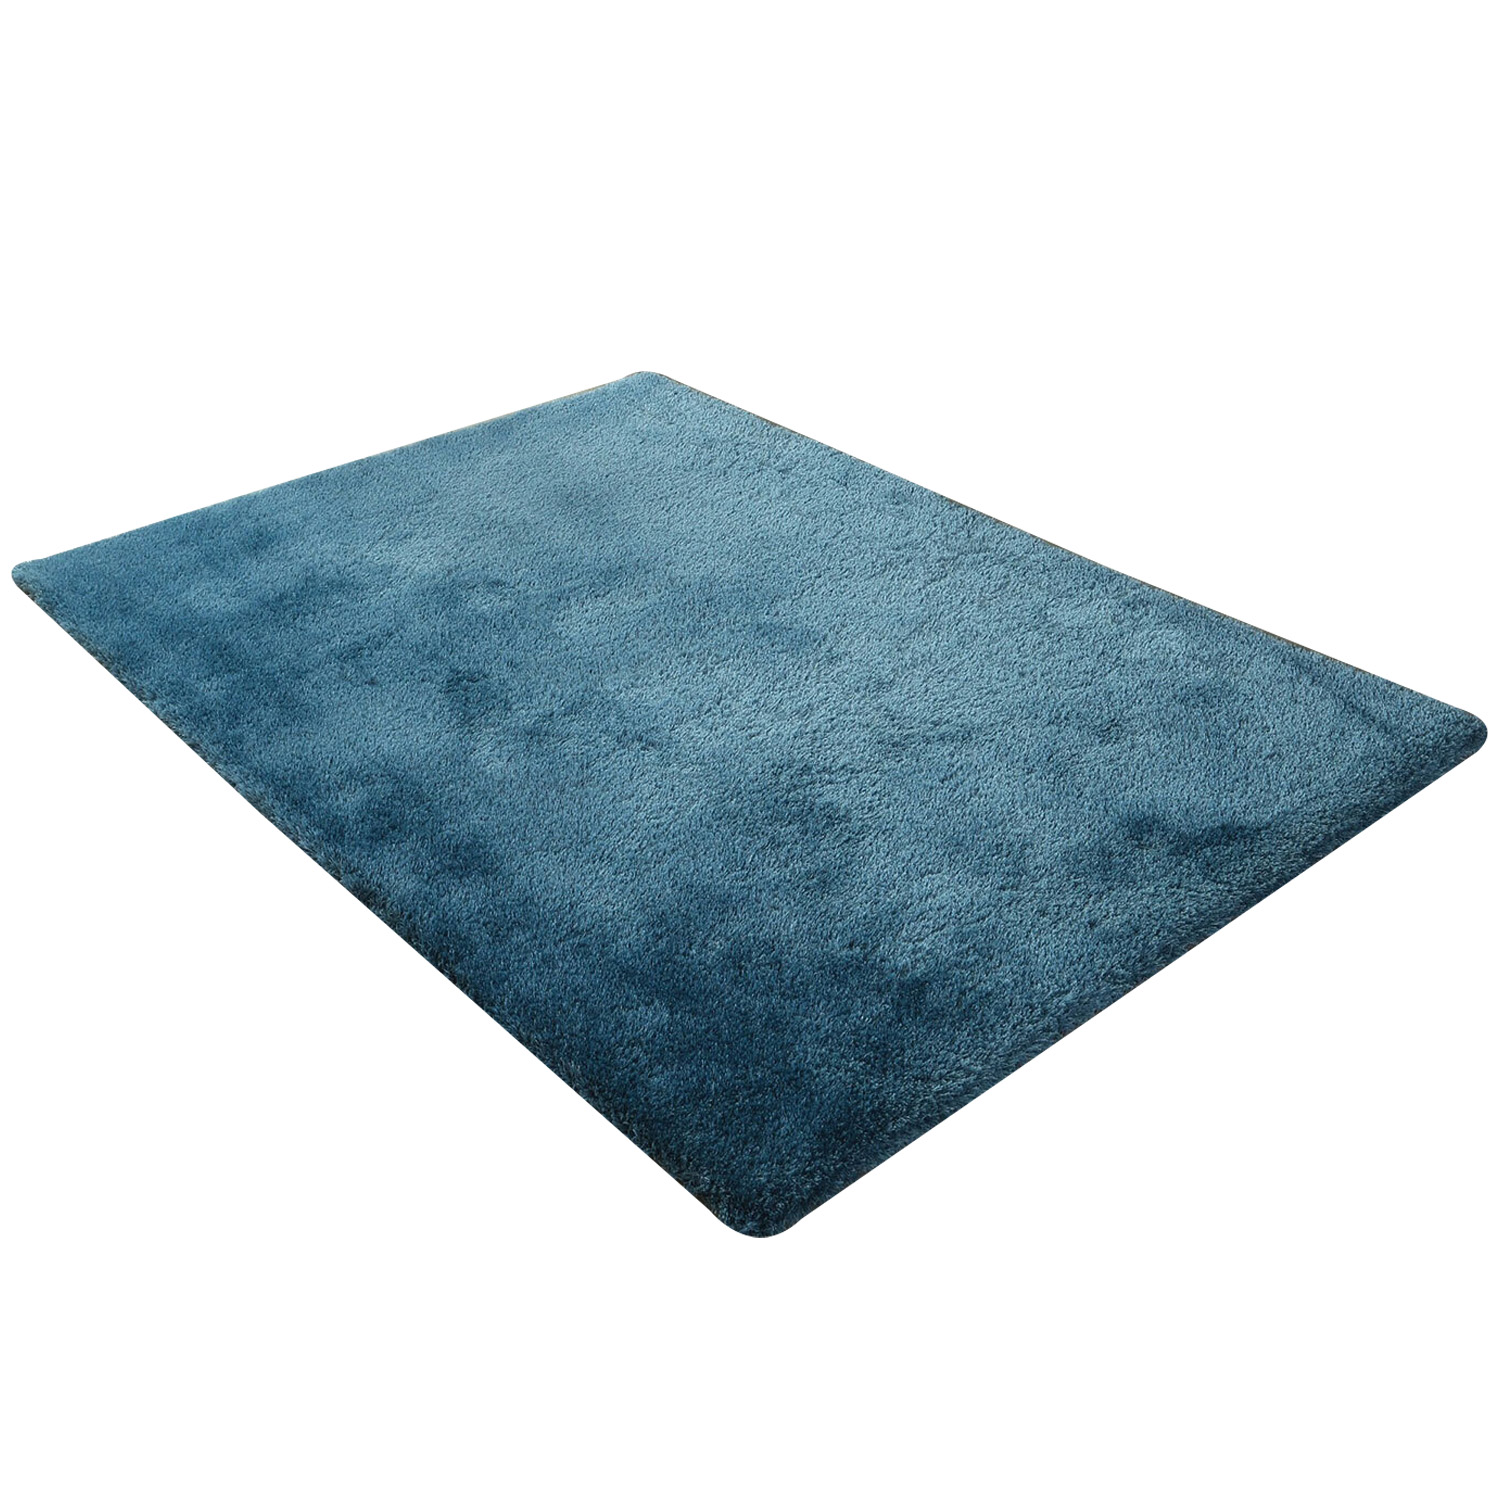 Deluxe Shaggy Rug - Radiant Blue / 90cm Image 1